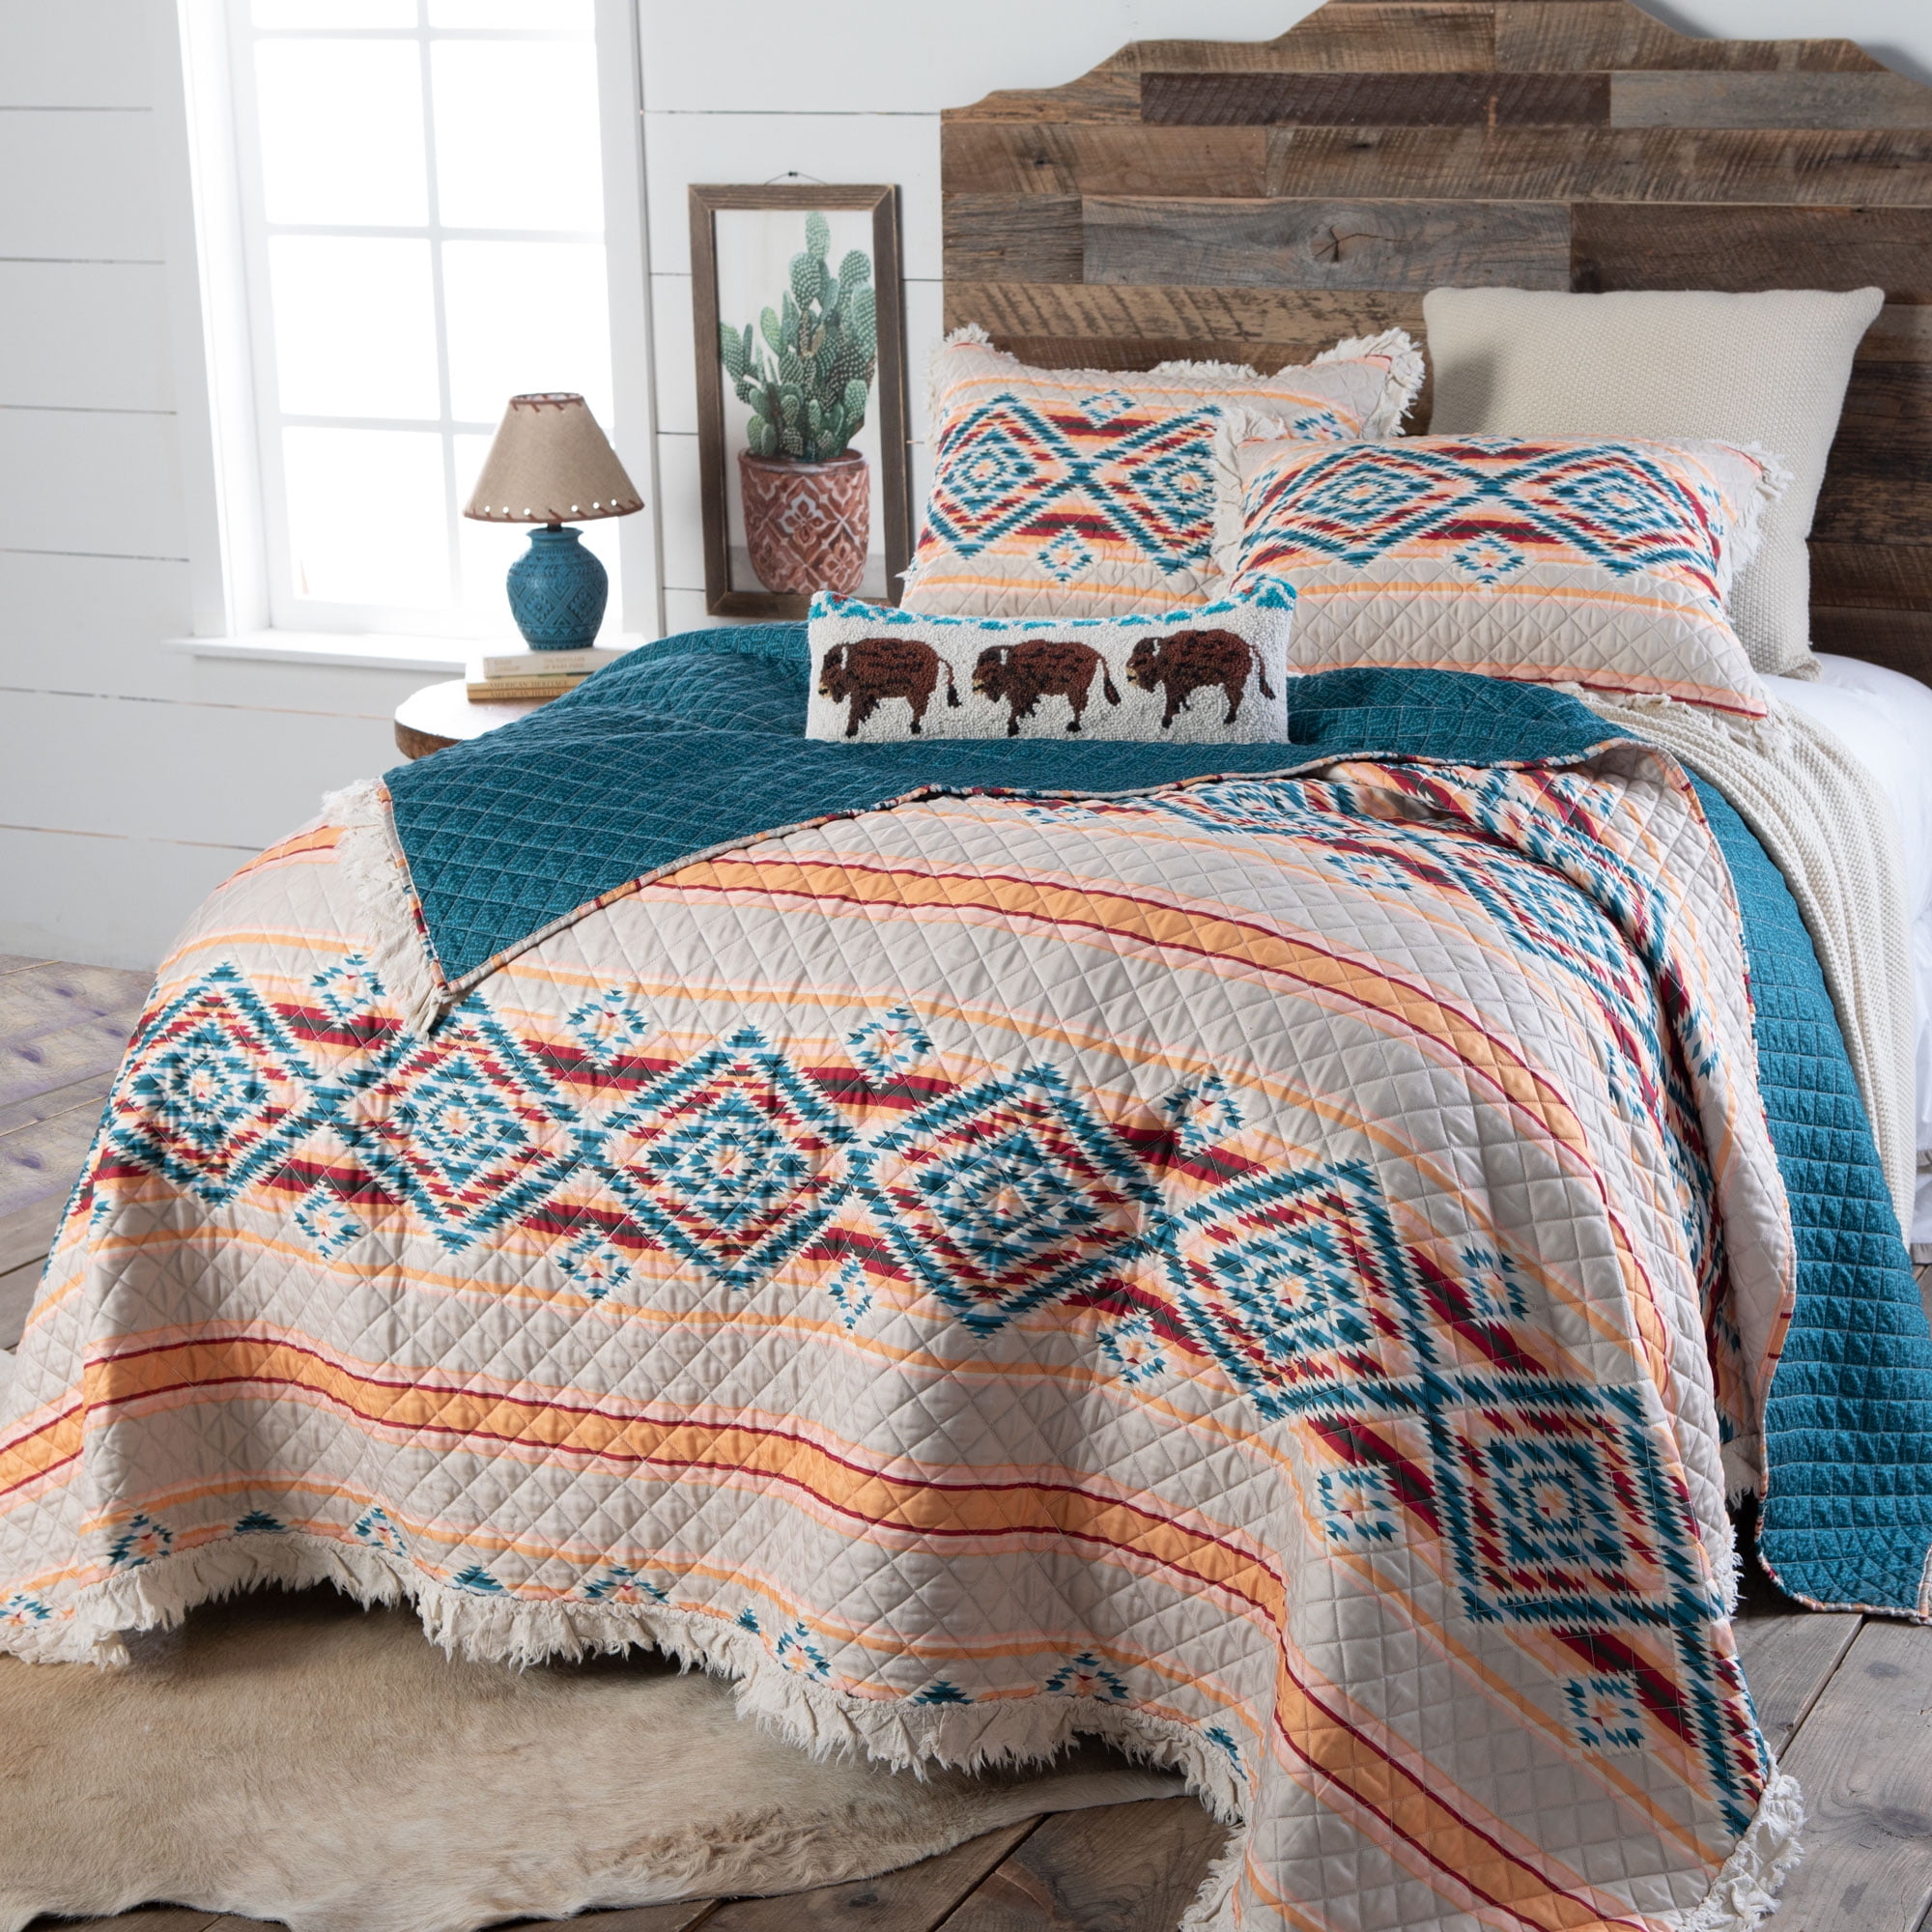 YellowStone Style Southwestern King Quilt Native American Tribal Bedspread 3pc 